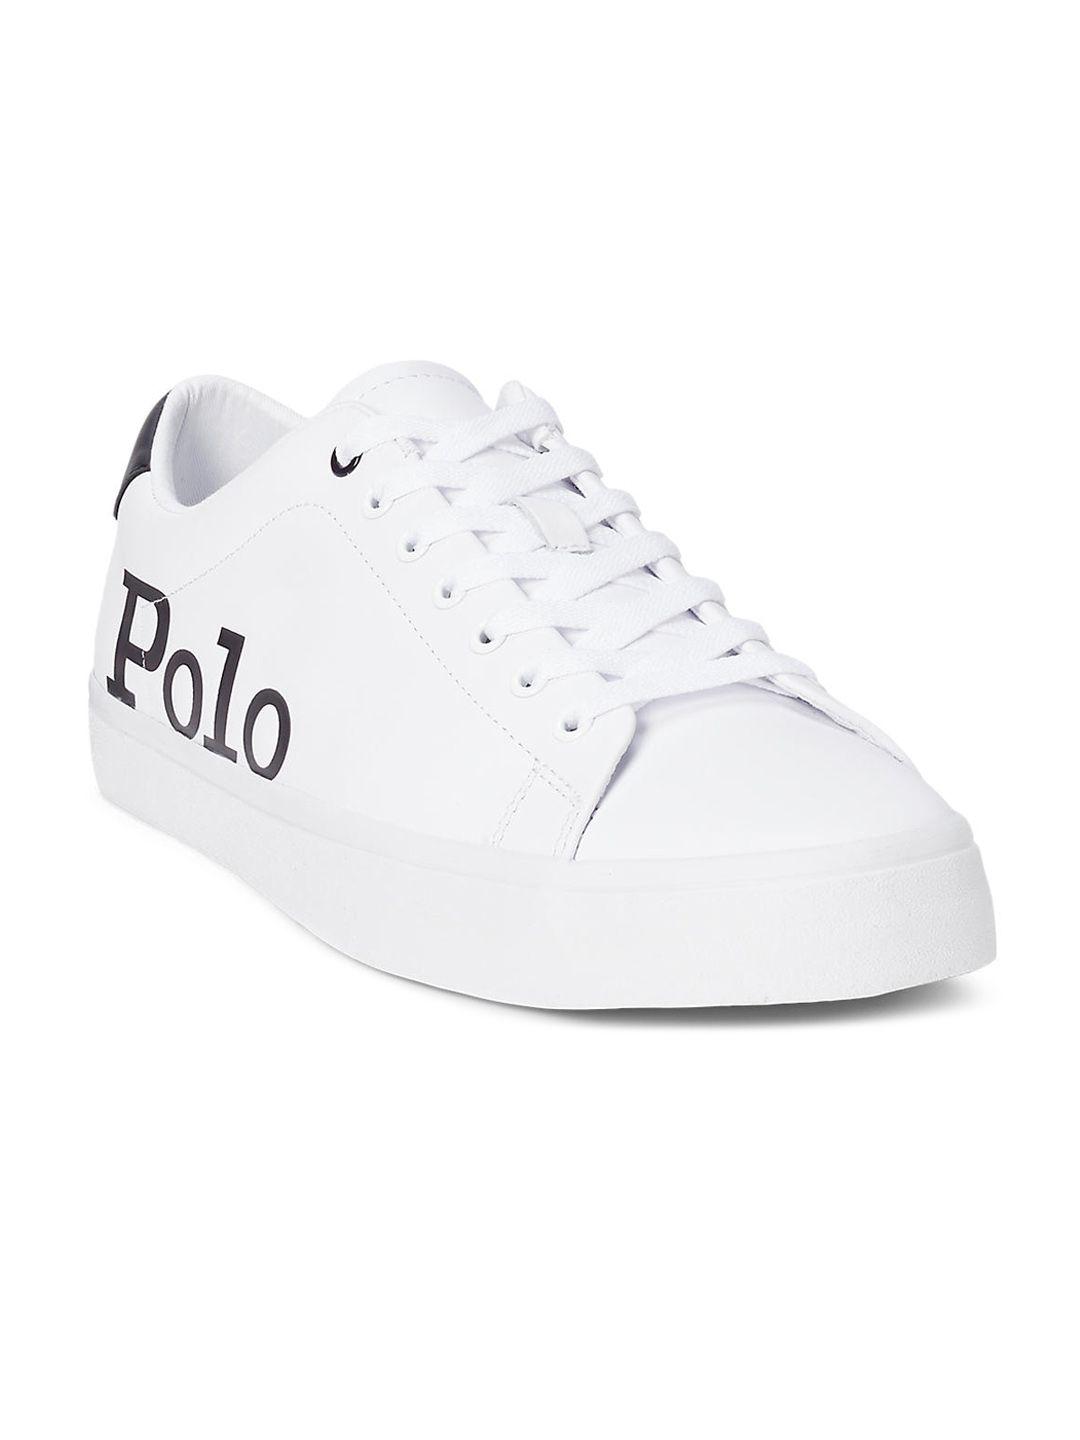 polo ralph lauren men white printed leather sneakers